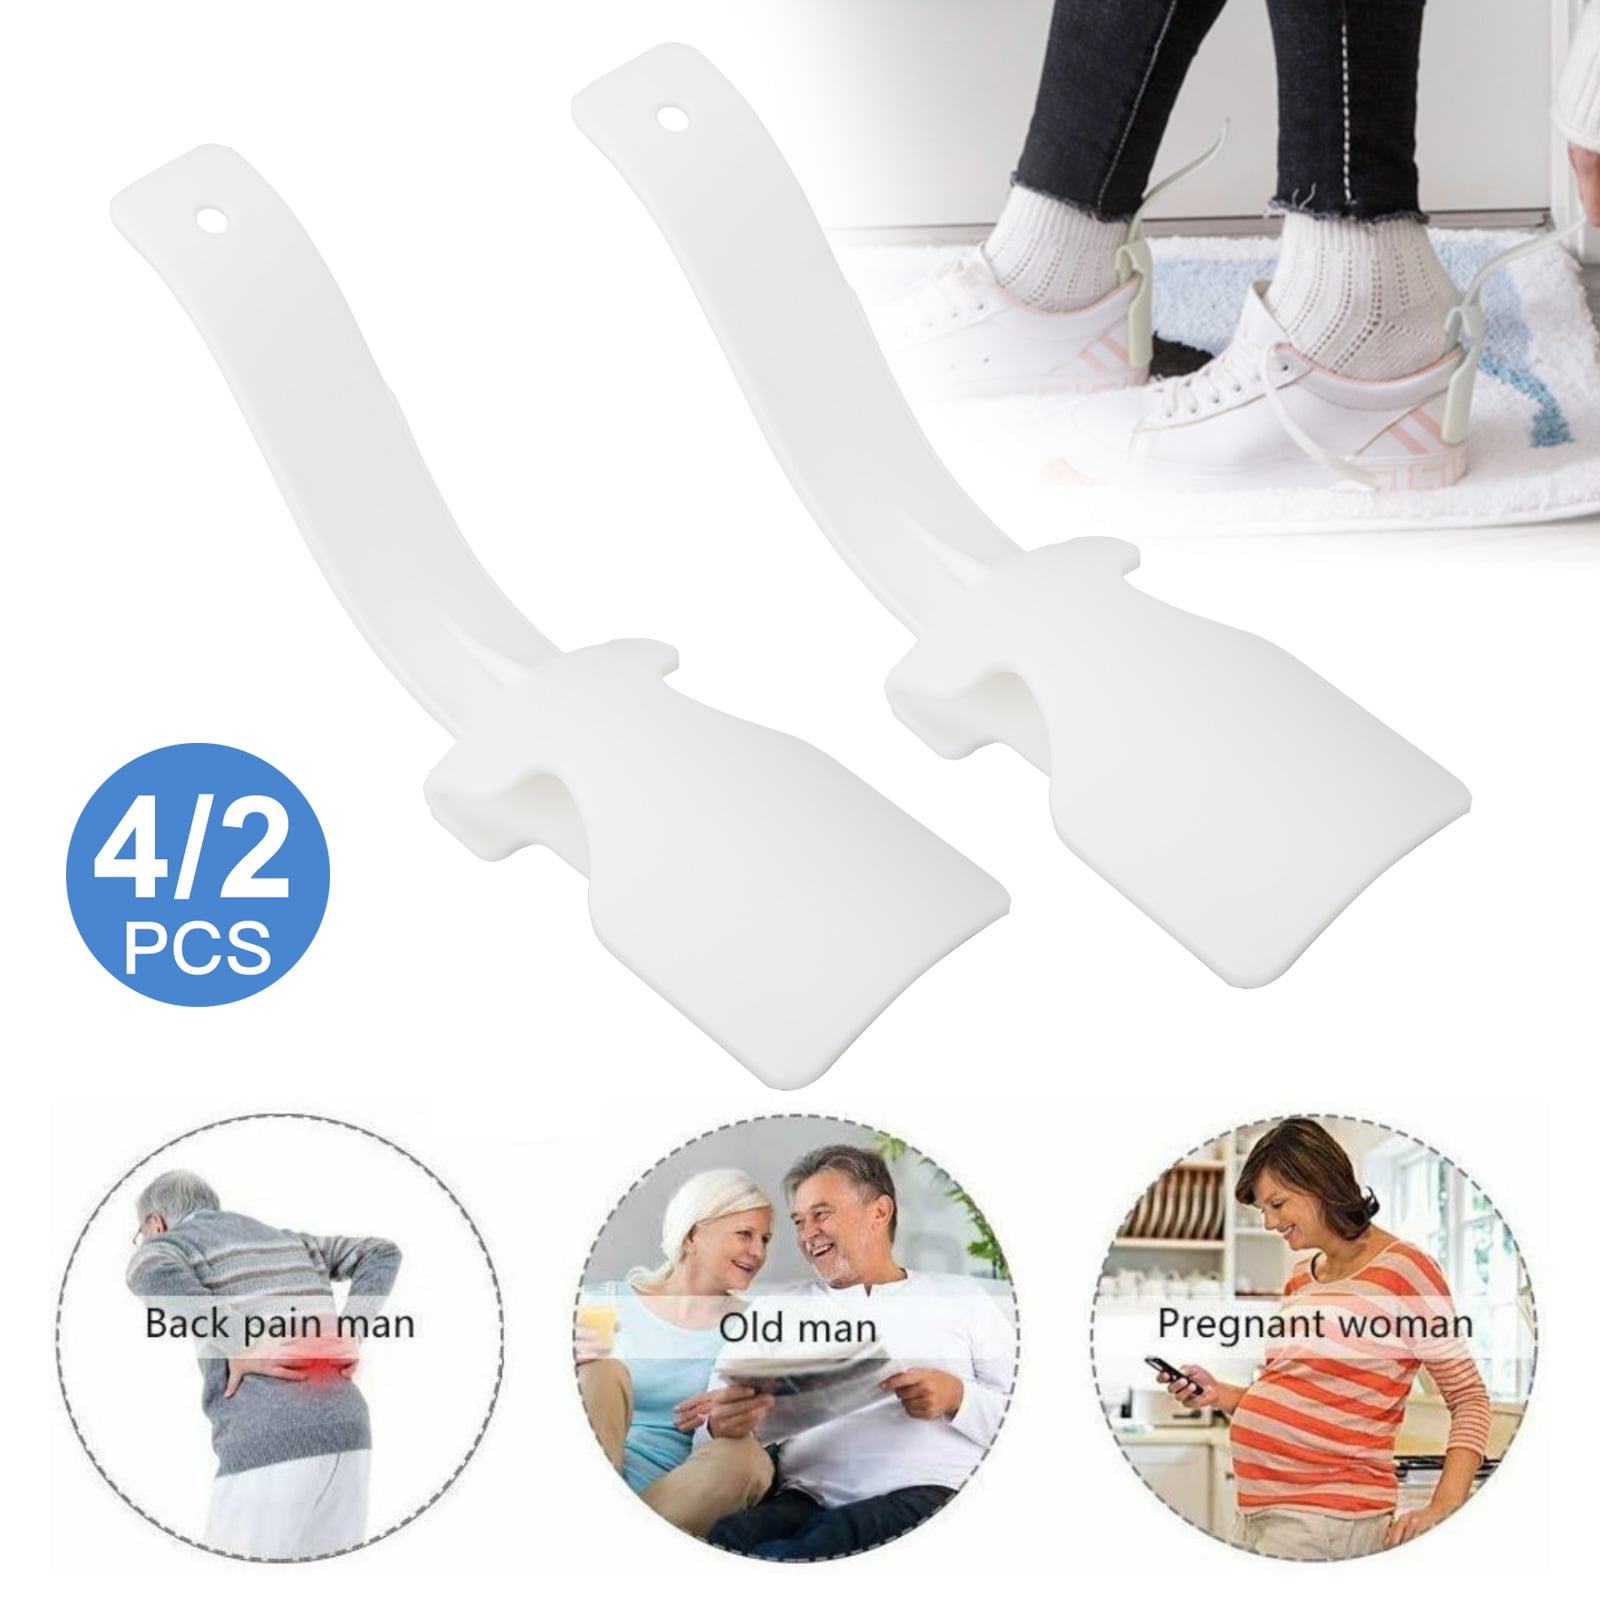 2020 New Shoe Lifting Helper Easy on Easy Off Disabled Lazy Shoe Helper Portable Travel Handled Shoehorn Pregnancy Perfect Plastic Shoe Horn/Slider for Elderly Fits for All Shoes 